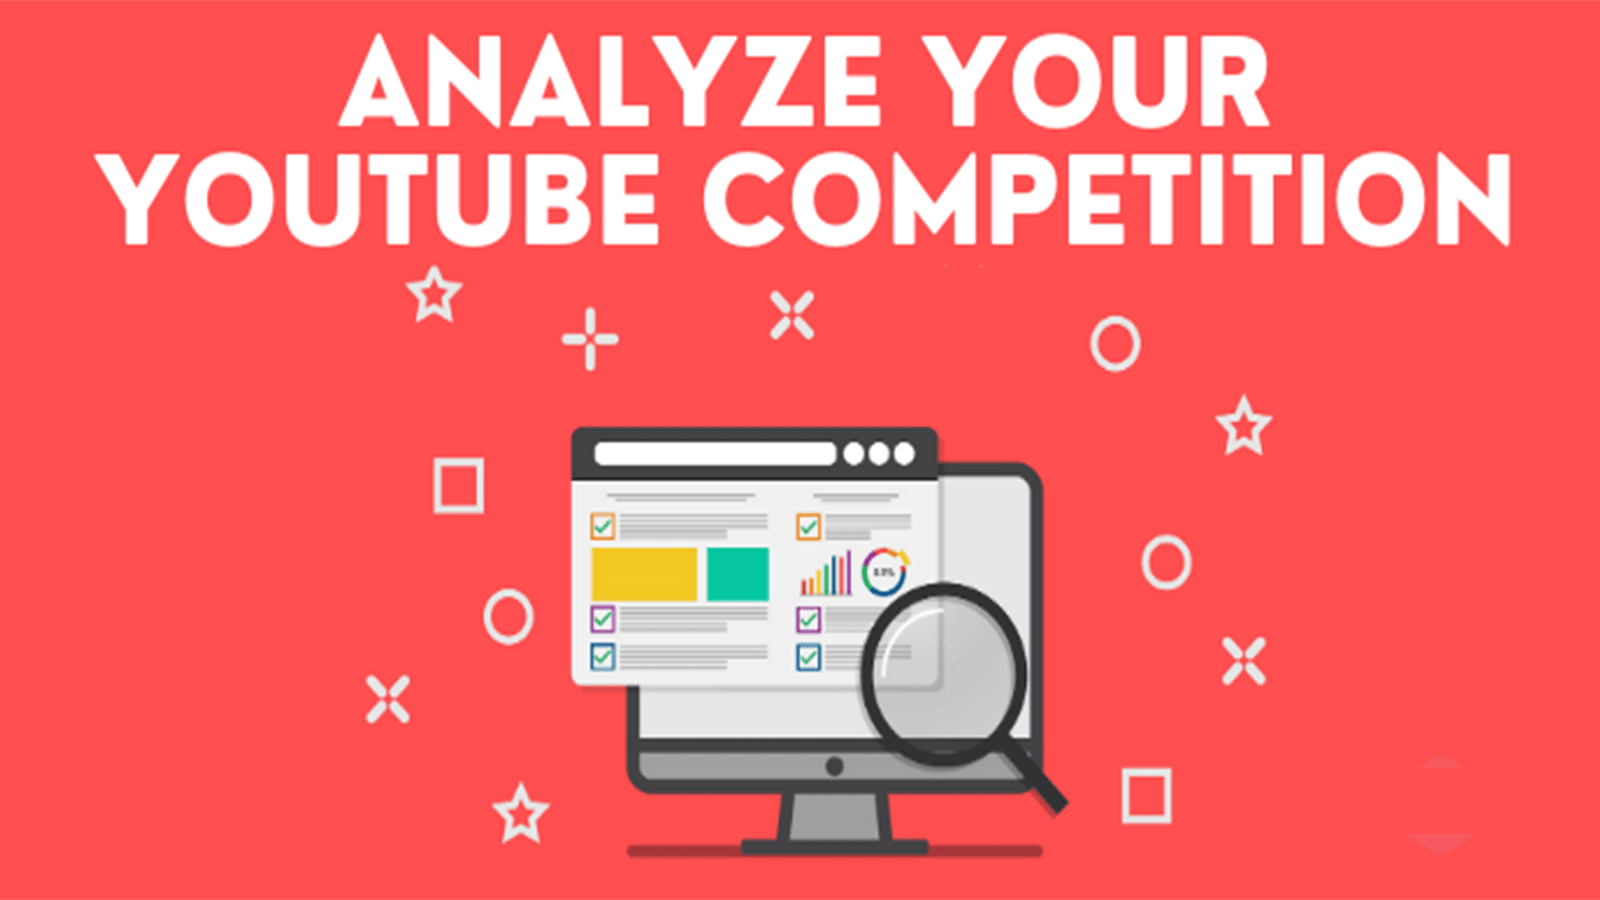 How To Do YouTube Competitor Analysis? (Spy on Your Competitor)